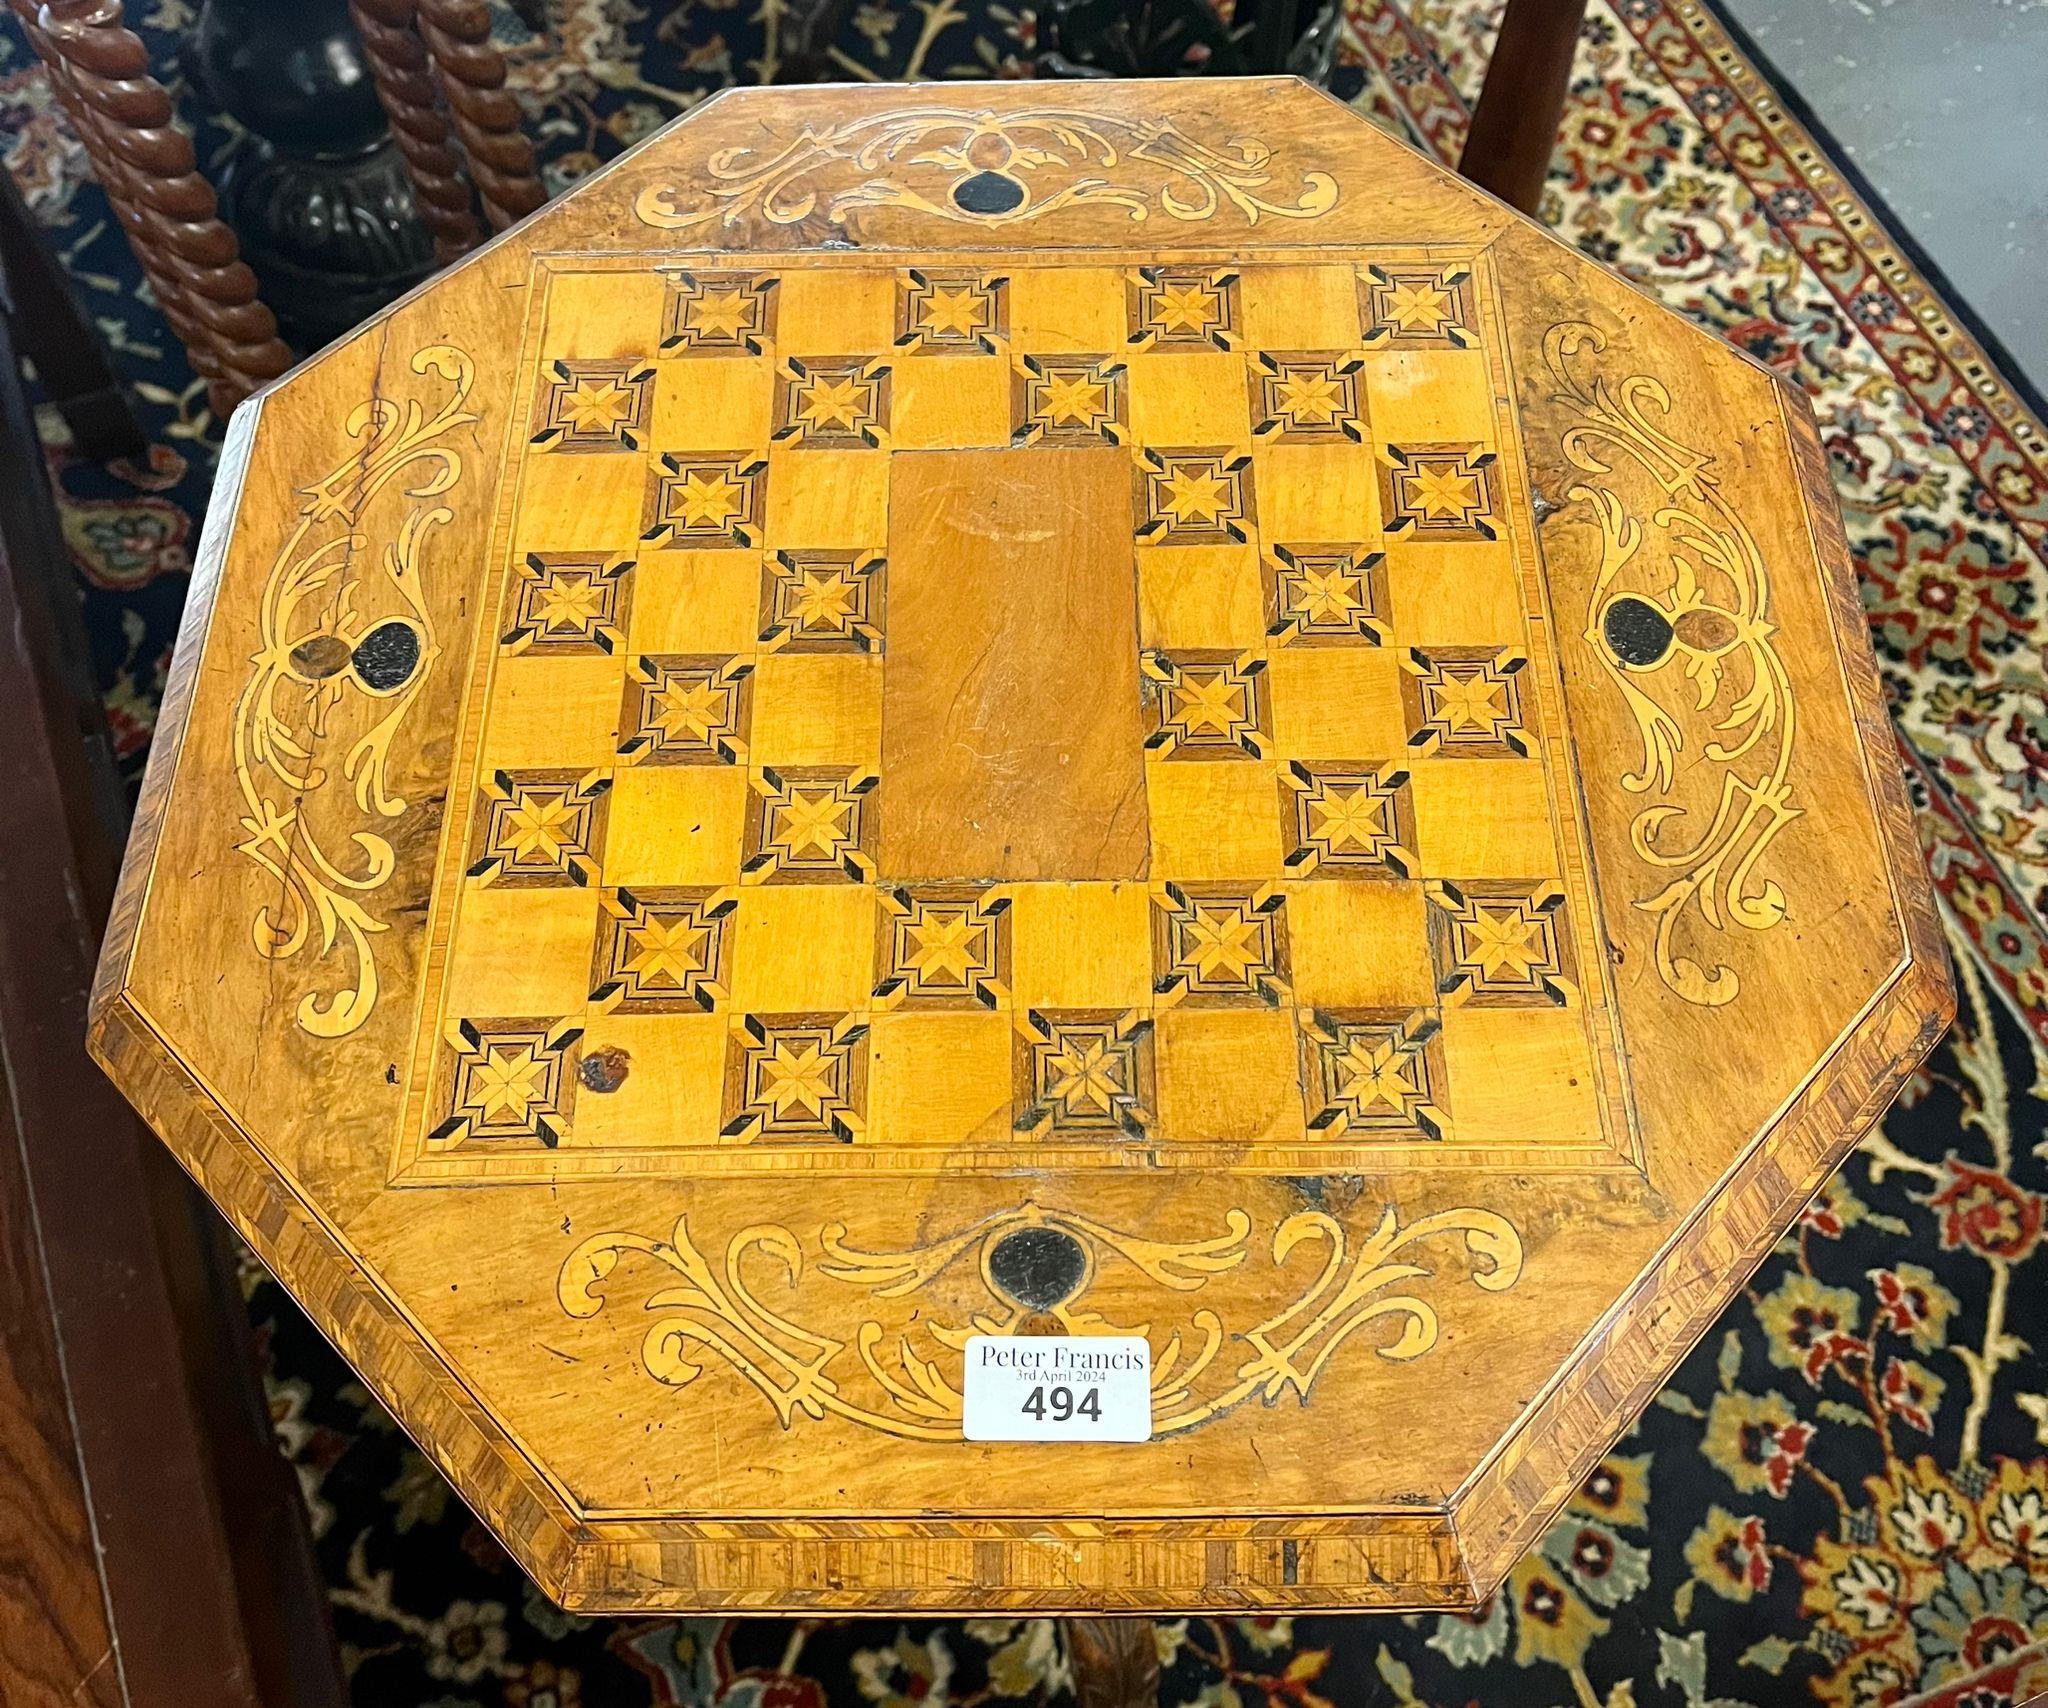 Victorian walnut mixed woods inlaid octagonal tripod games table and work box. (B.P. 21% + VAT) - Image 2 of 2